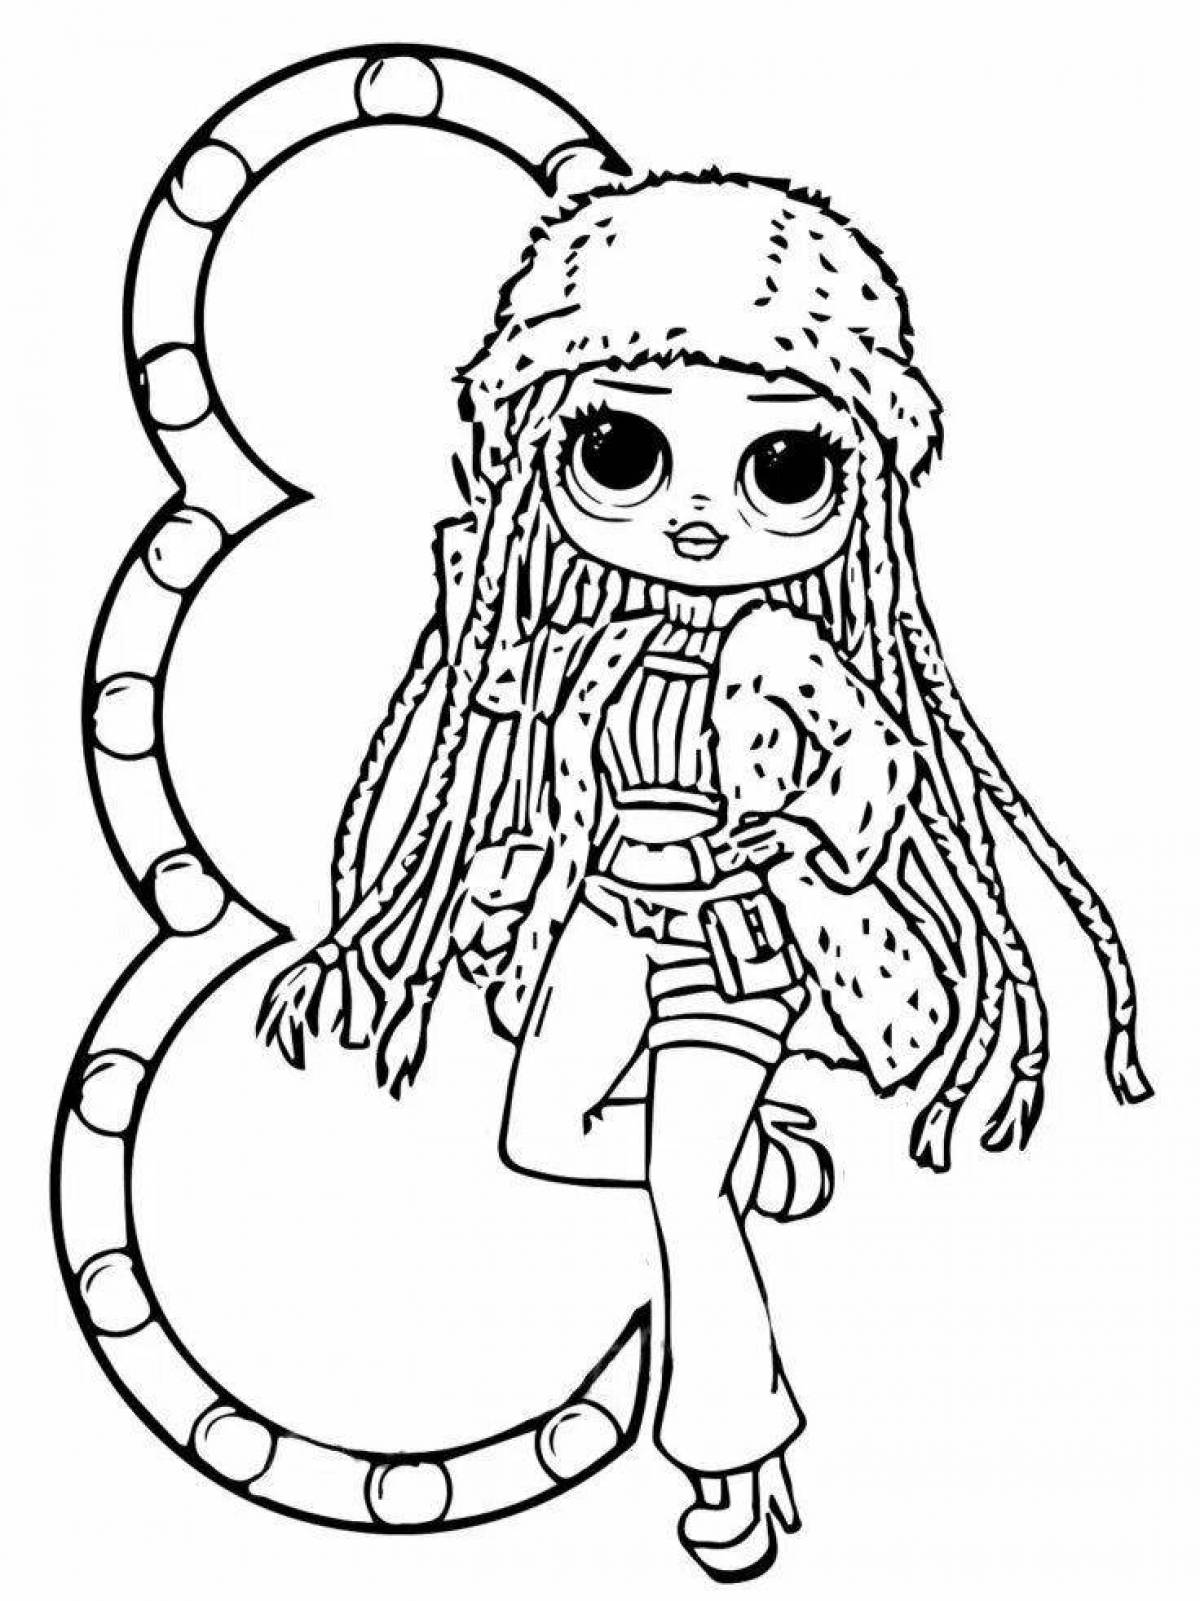 Radiant coloring page lol dolls new